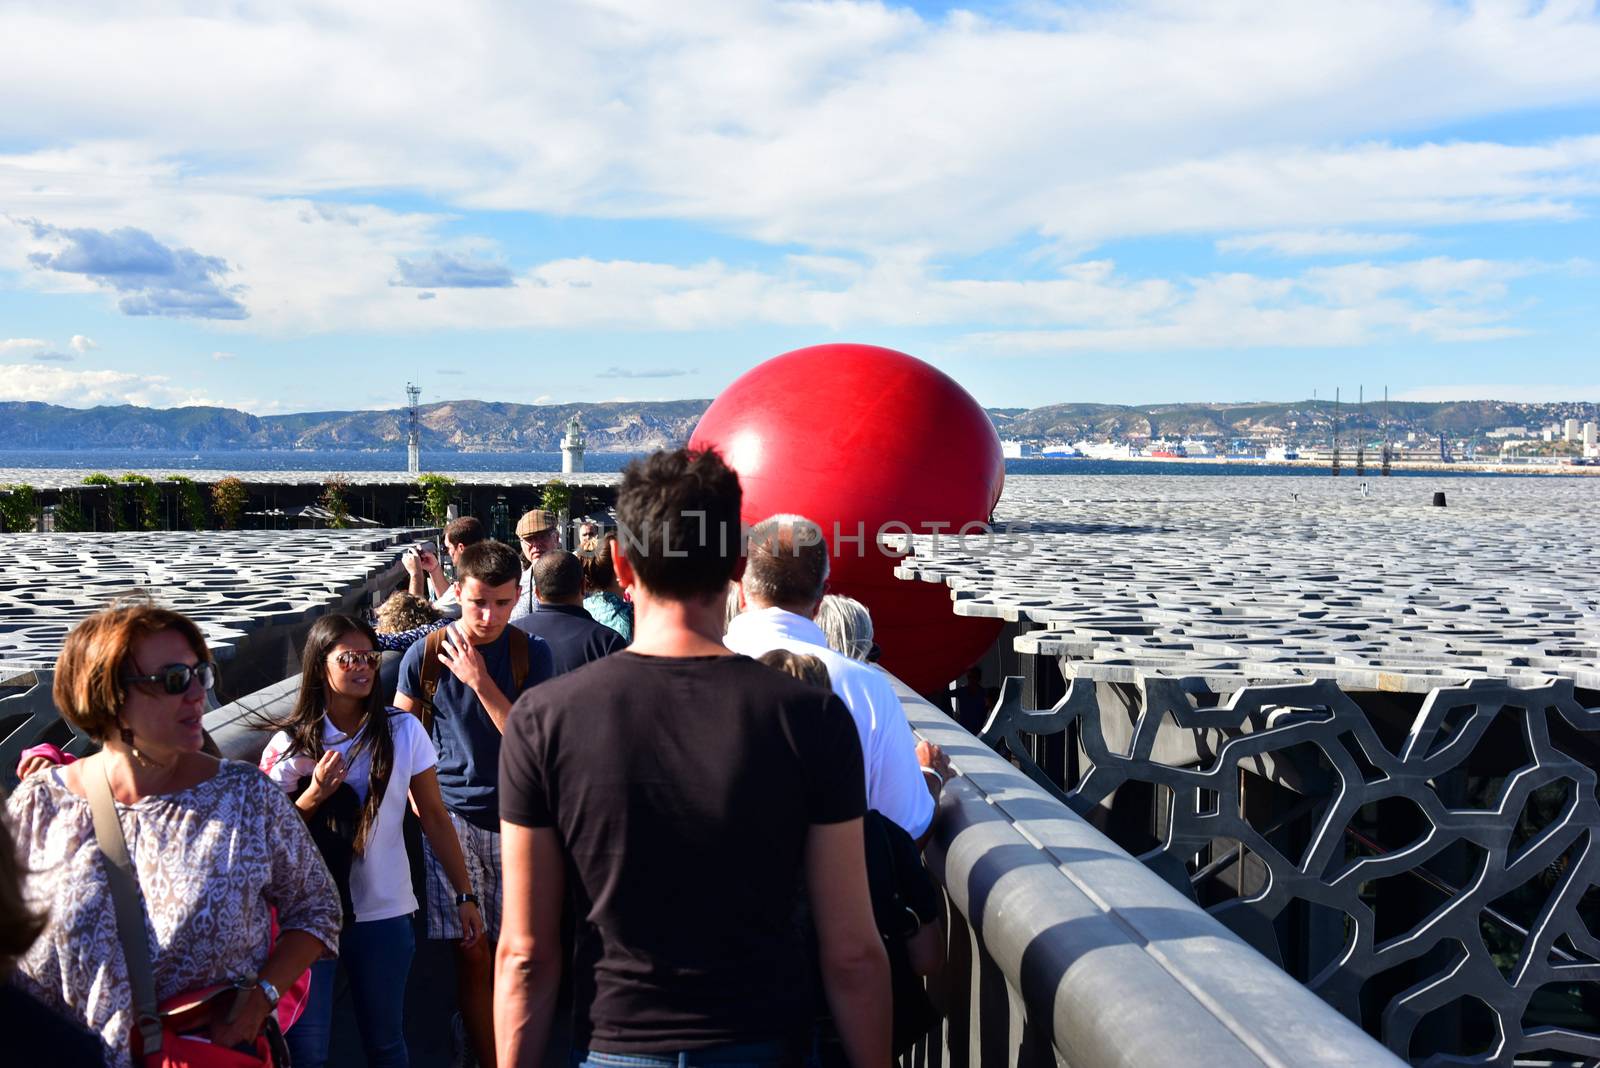 FRANCE, Marseille : This picture taken on September 19, 2015 in Marseille, shows a red ball on the roof of Mucem museum. New York based artist Kurt Perschke's RedBall project stopped off in Marseille between September 19 and 25, 2015. The project involves installing a five meter wide red ball in different places from town to town. 